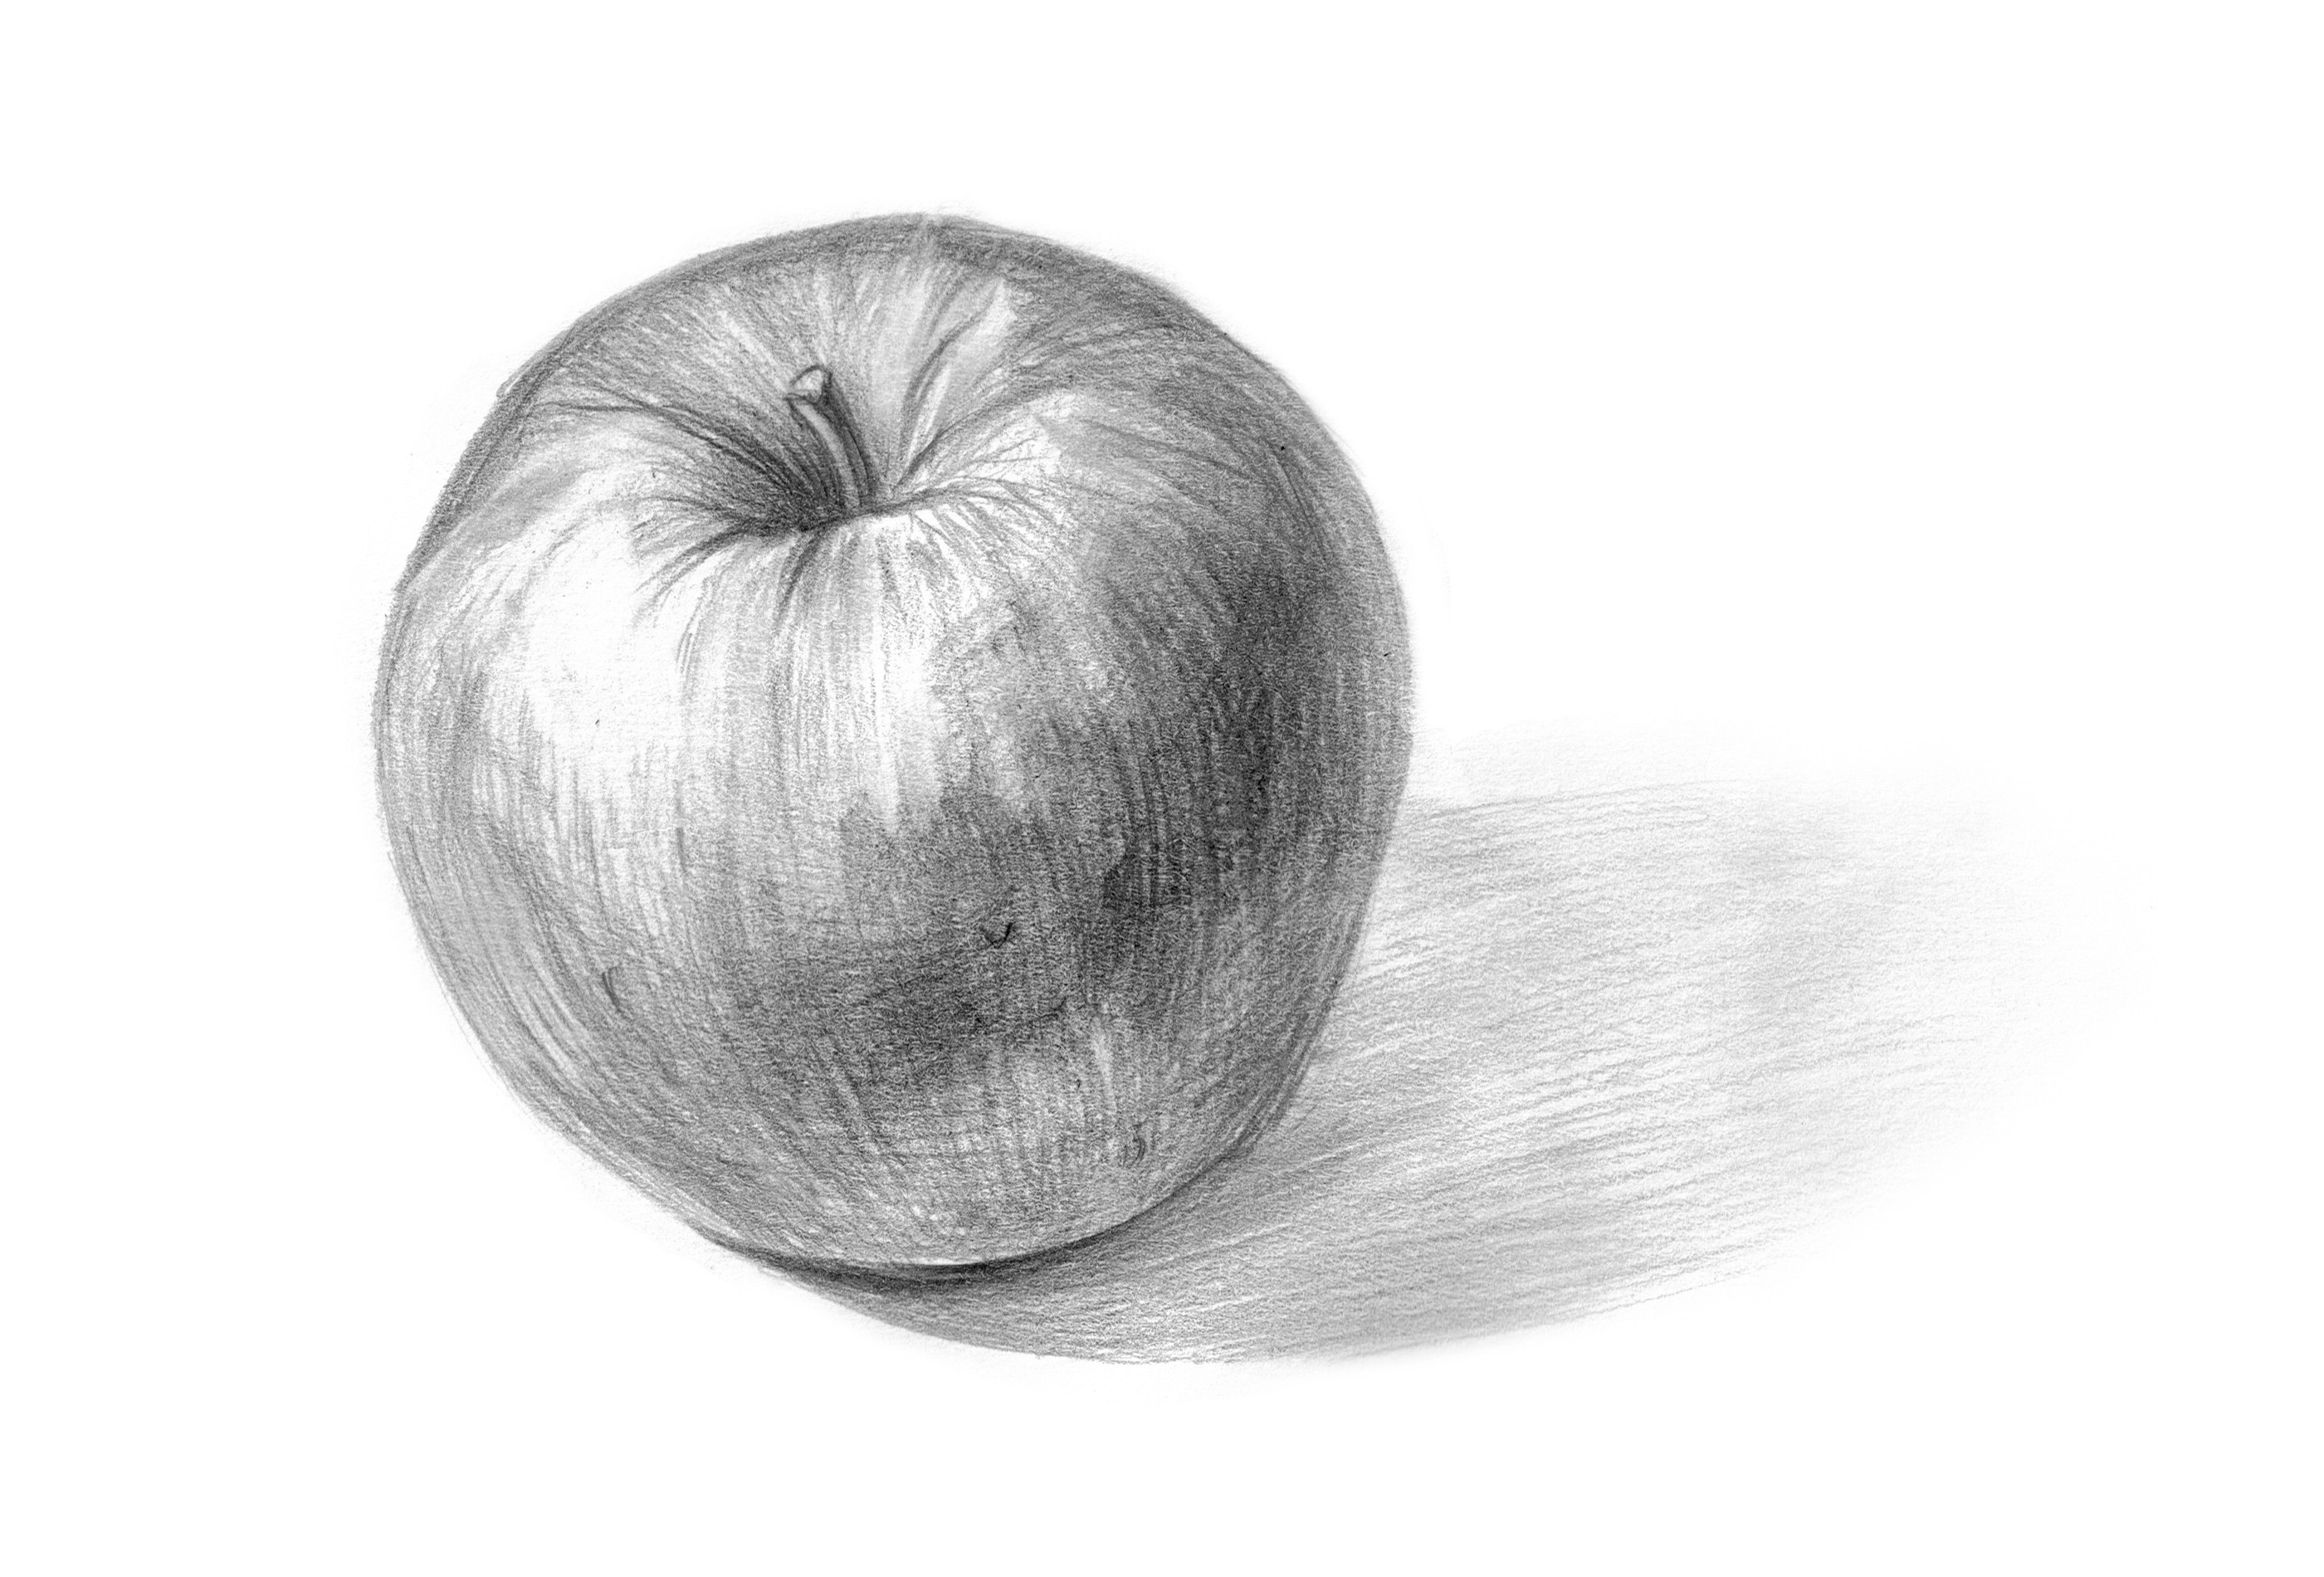 Pencil drawing of apple;